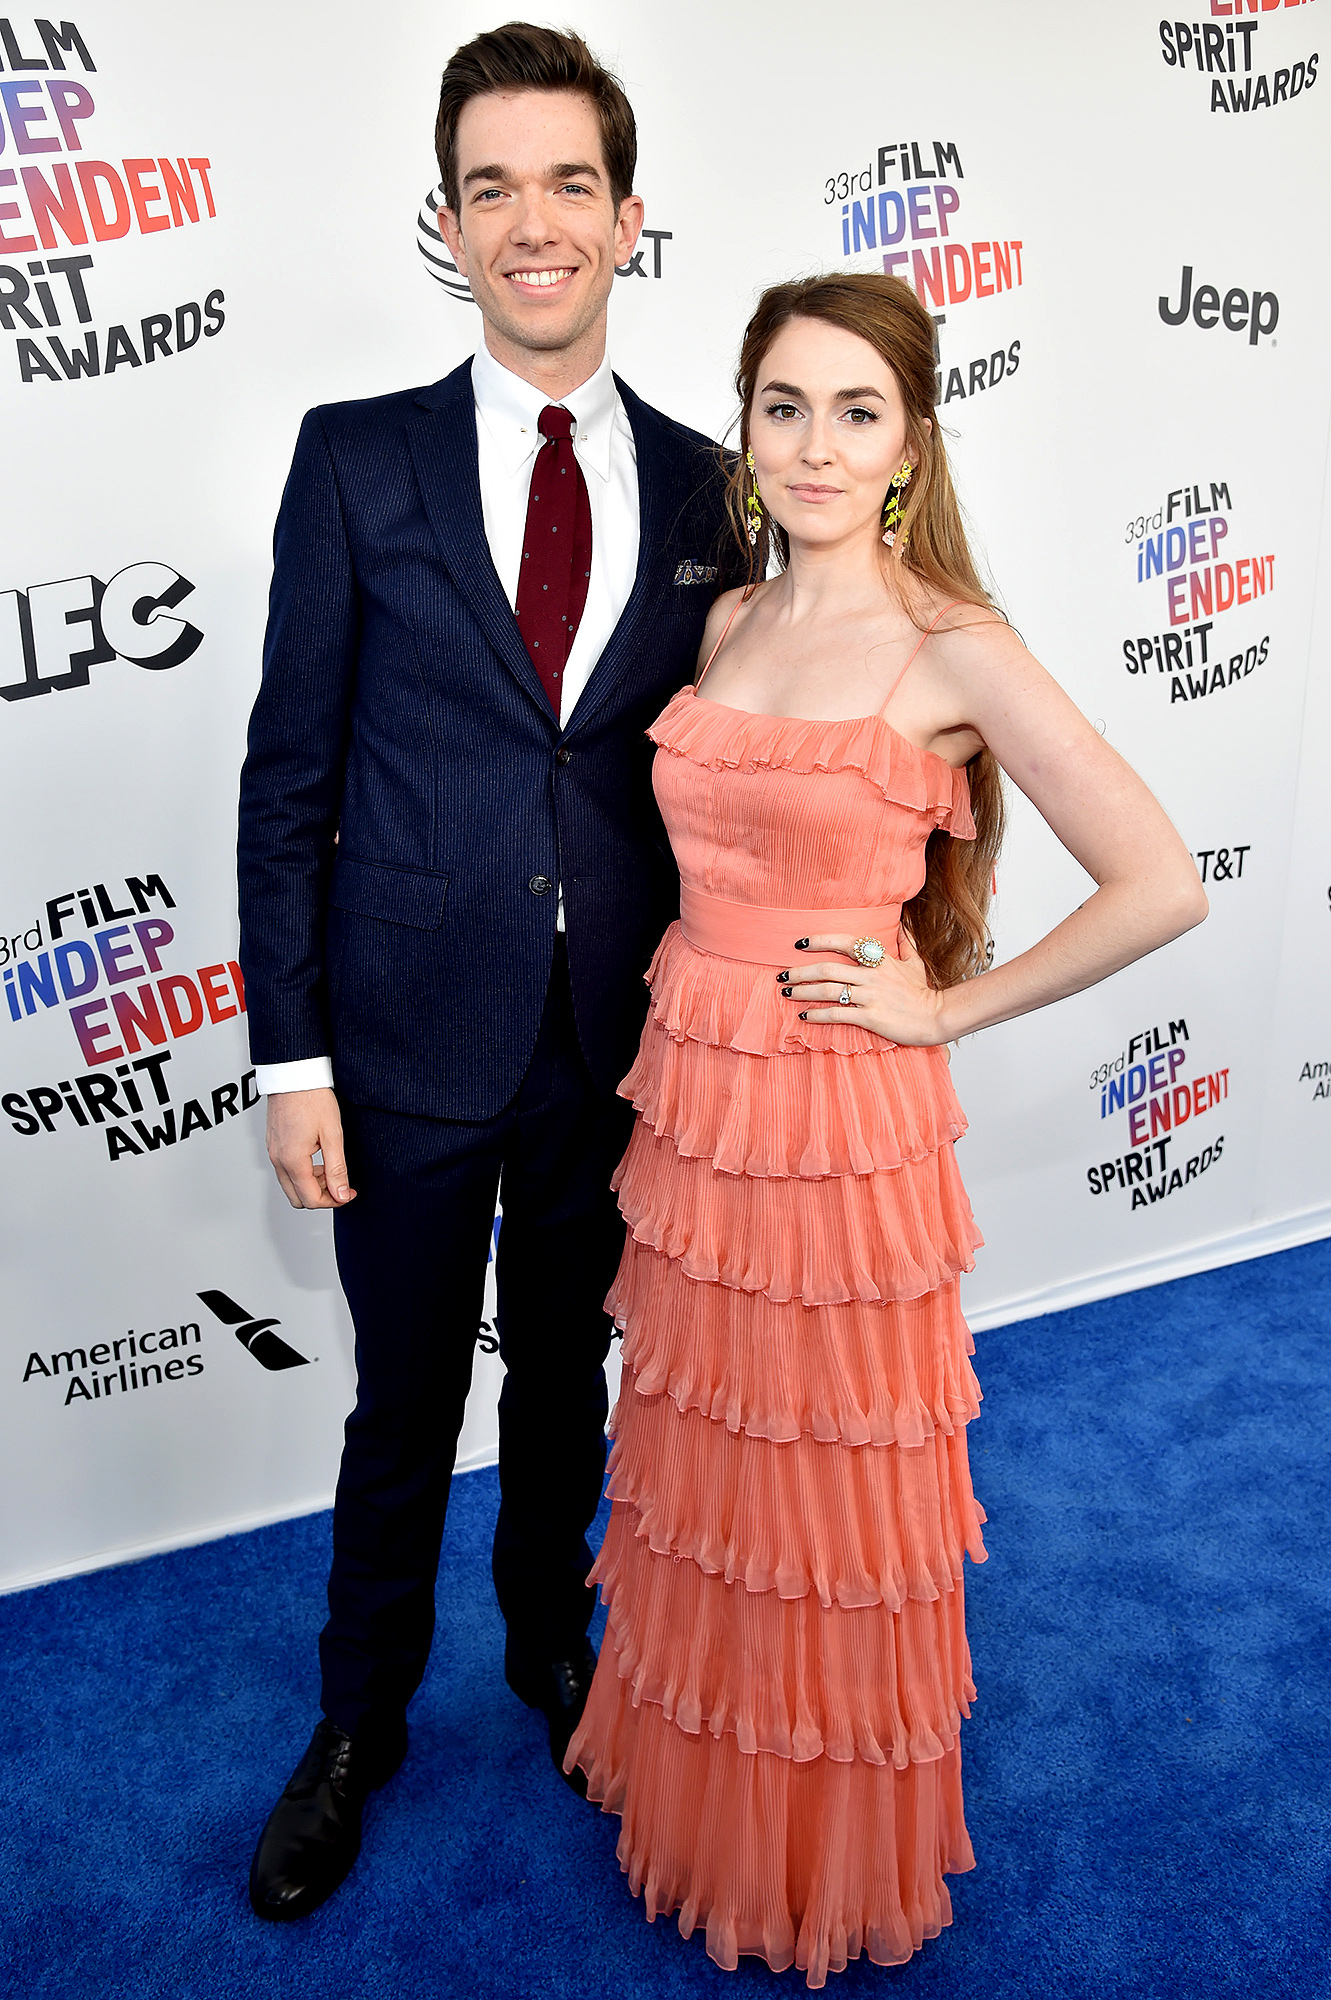 Who is John Mulaney's Wife, Annamarie Tendler? Age, Height